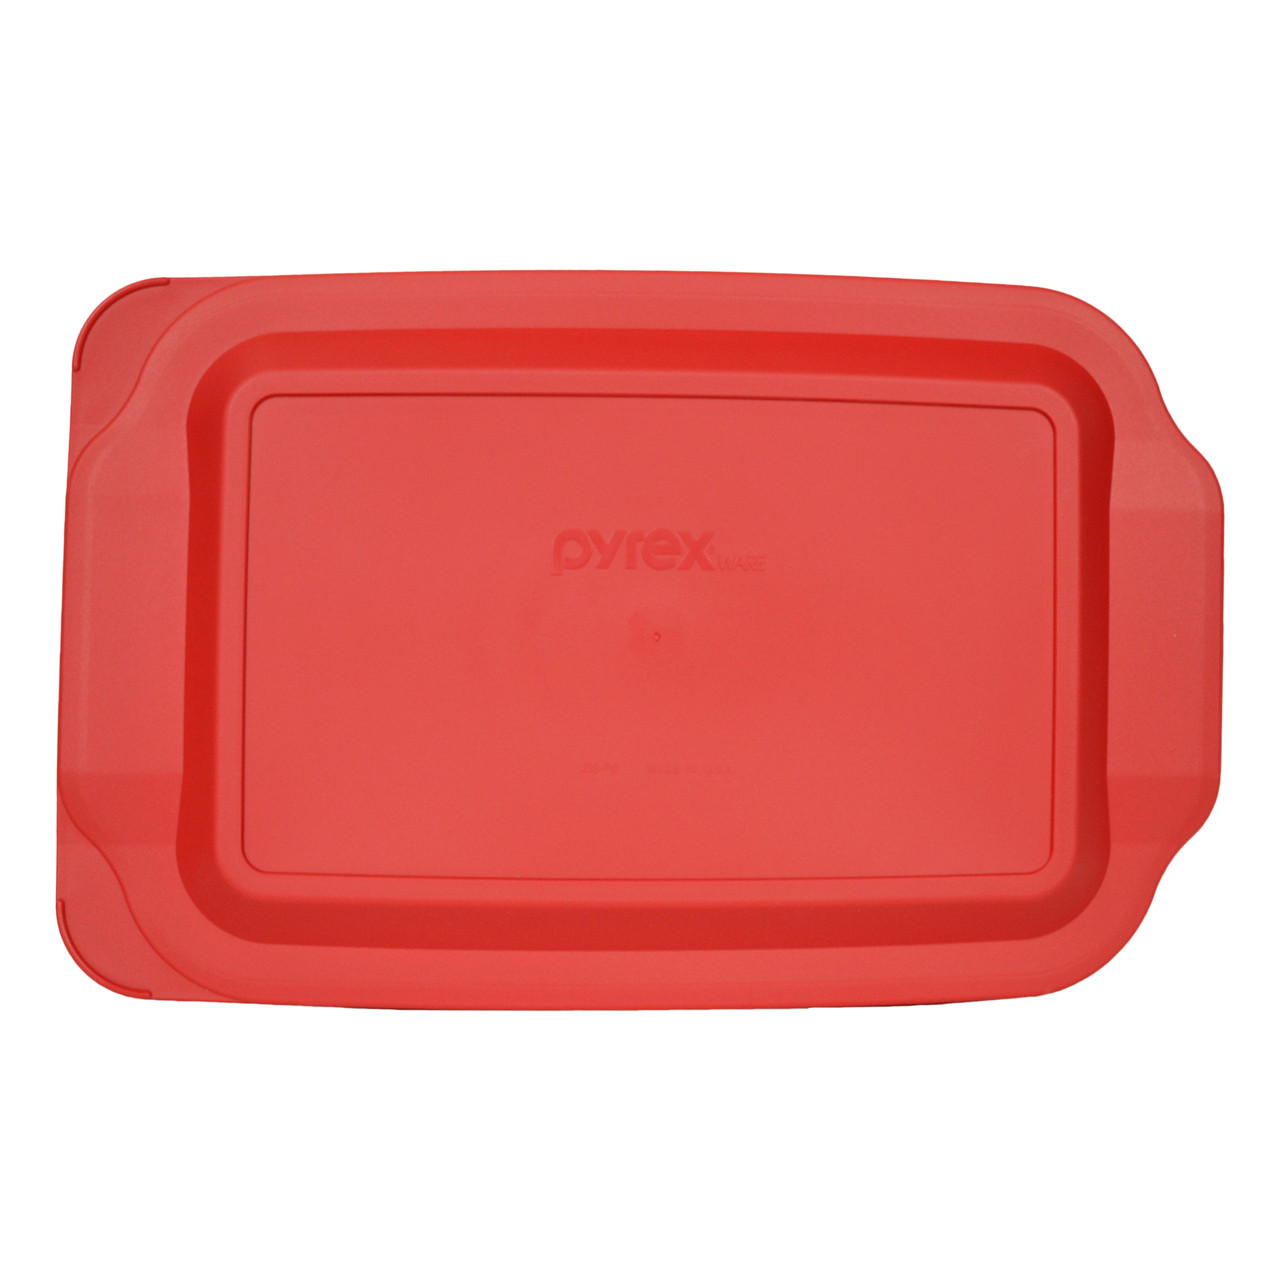 Easy Grab® 3-quart Glass Baking Dish with Red Lid